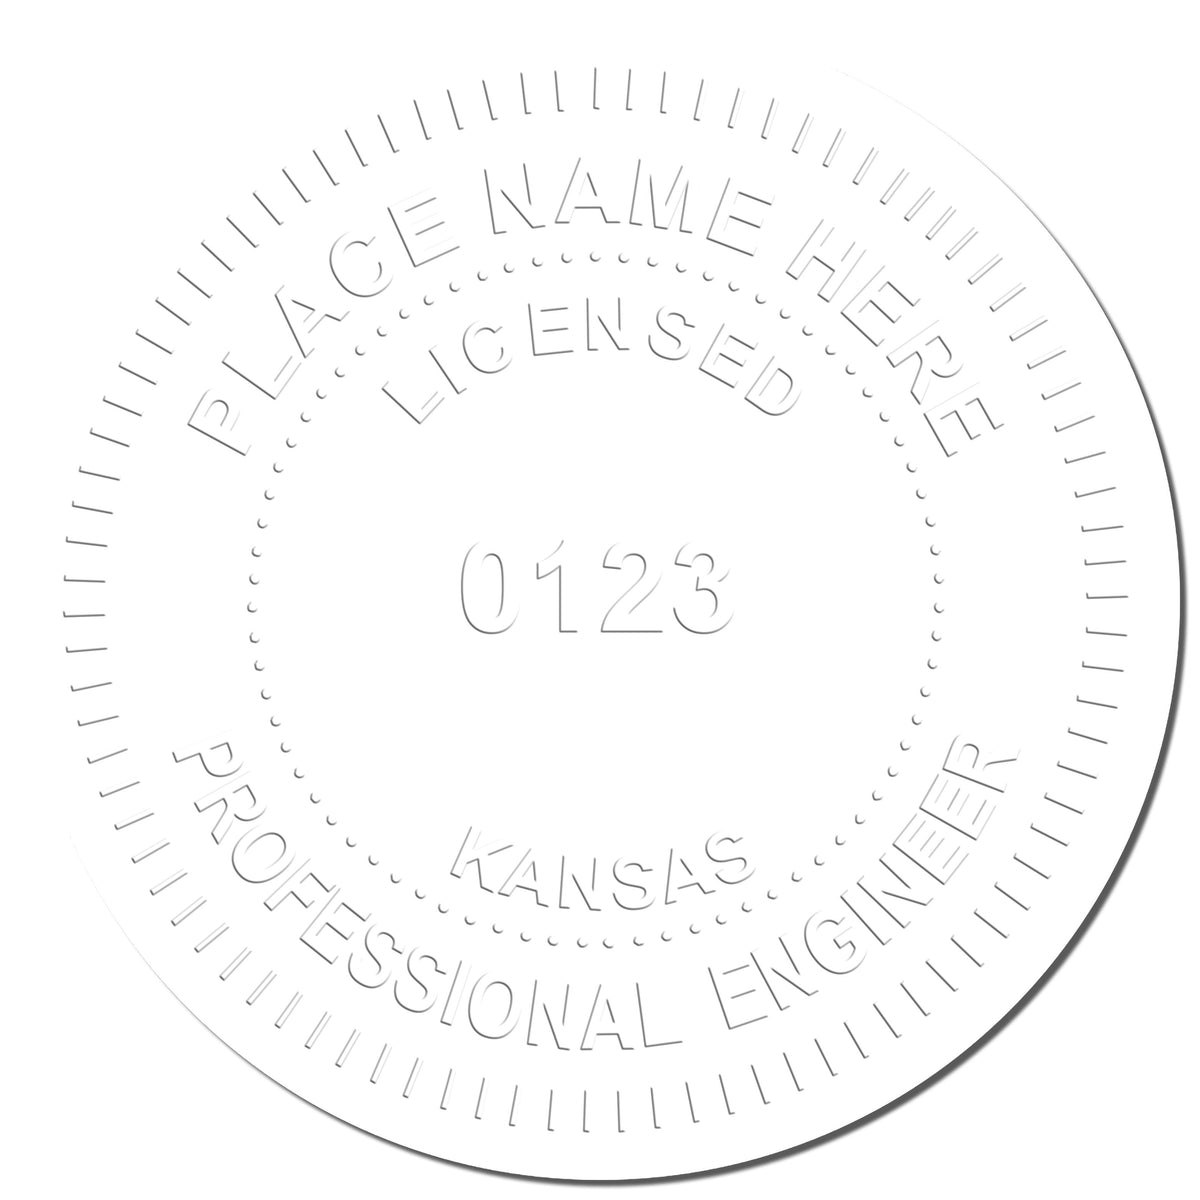 This paper is stamped with a sample imprint of the Hybrid Kansas Engineer Seal, signifying its quality and reliability.